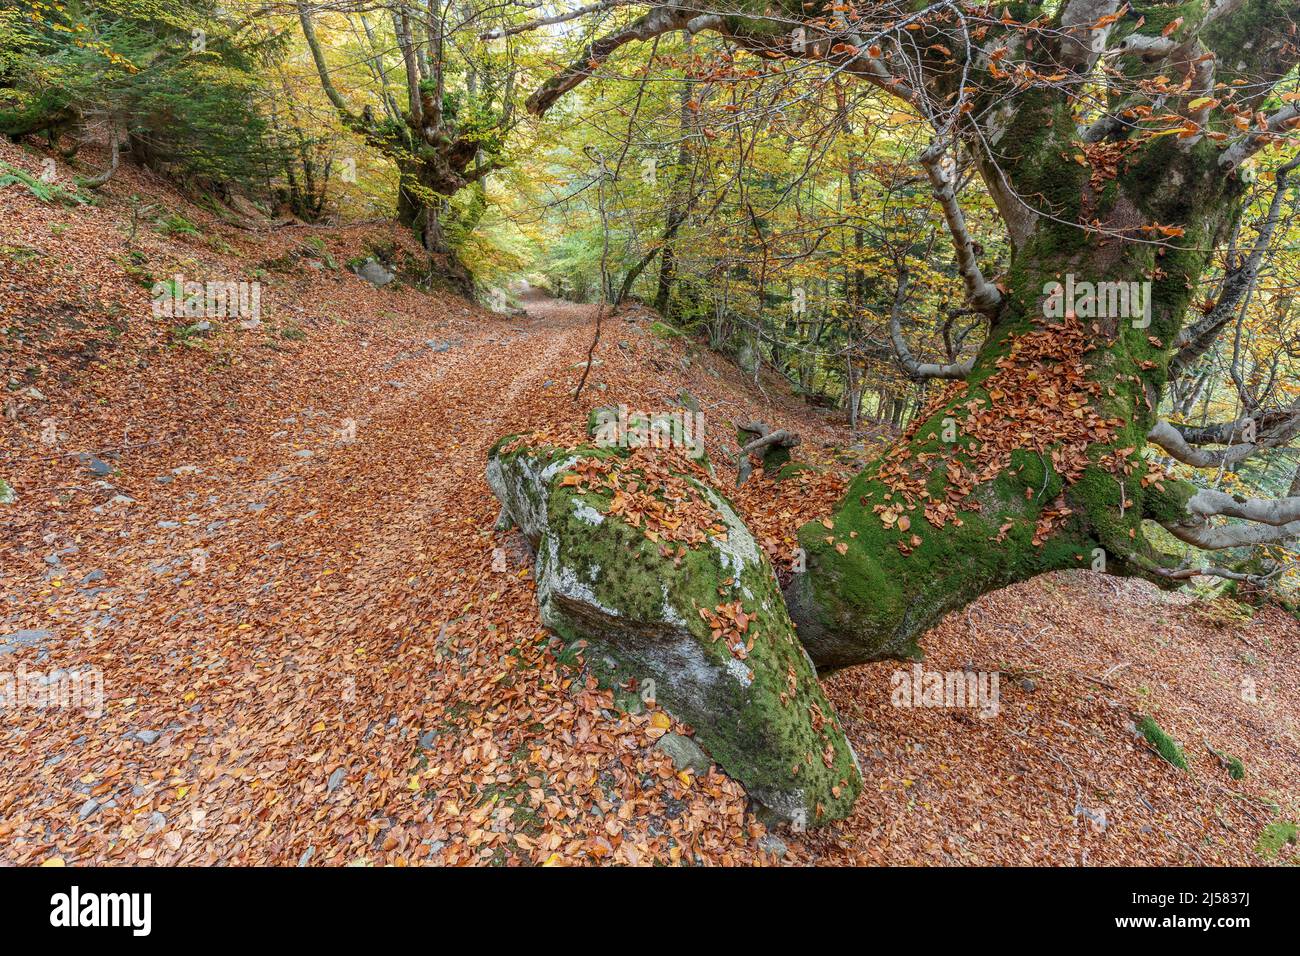 Carlac forest in autumn, Aran valley, Pyrenees, Spain Stock Photo